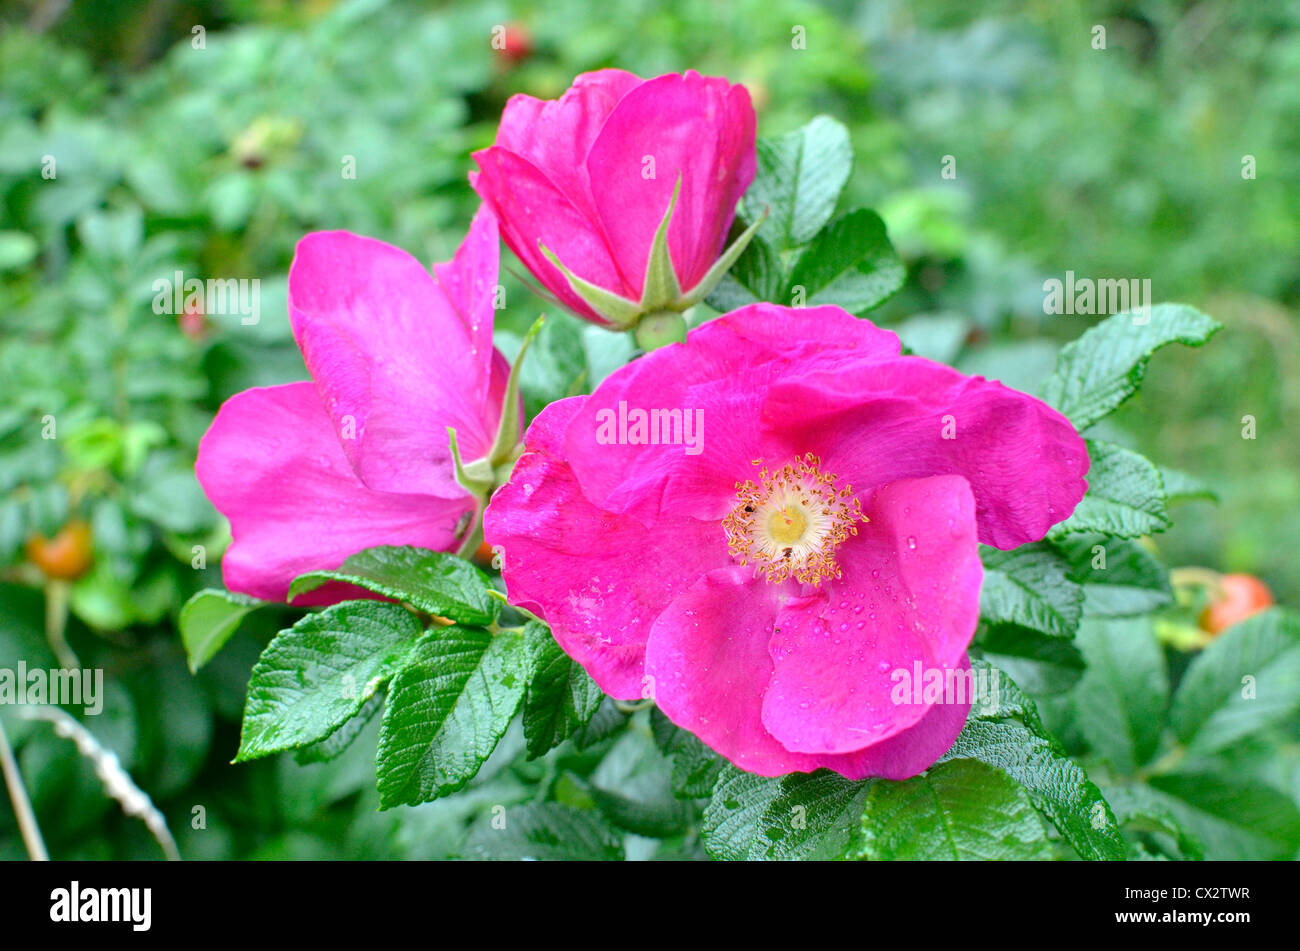 Purple pink flowers of Japanese Rose / Rosa rugosa. Focal point on ...